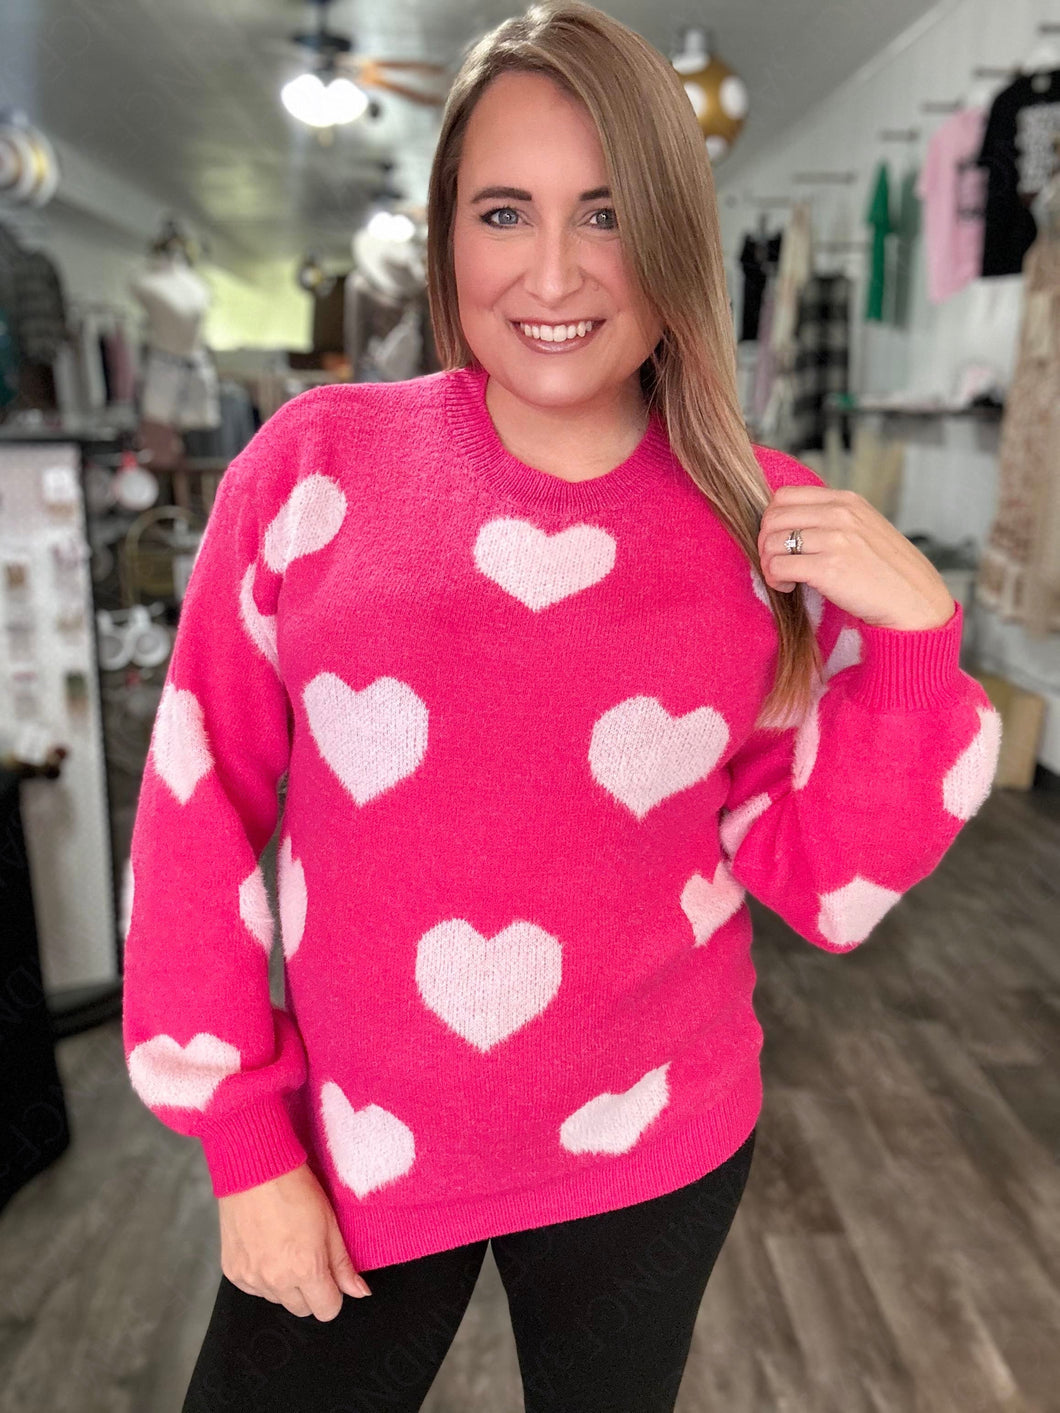 The Sweetheart Hot Pink Sweater